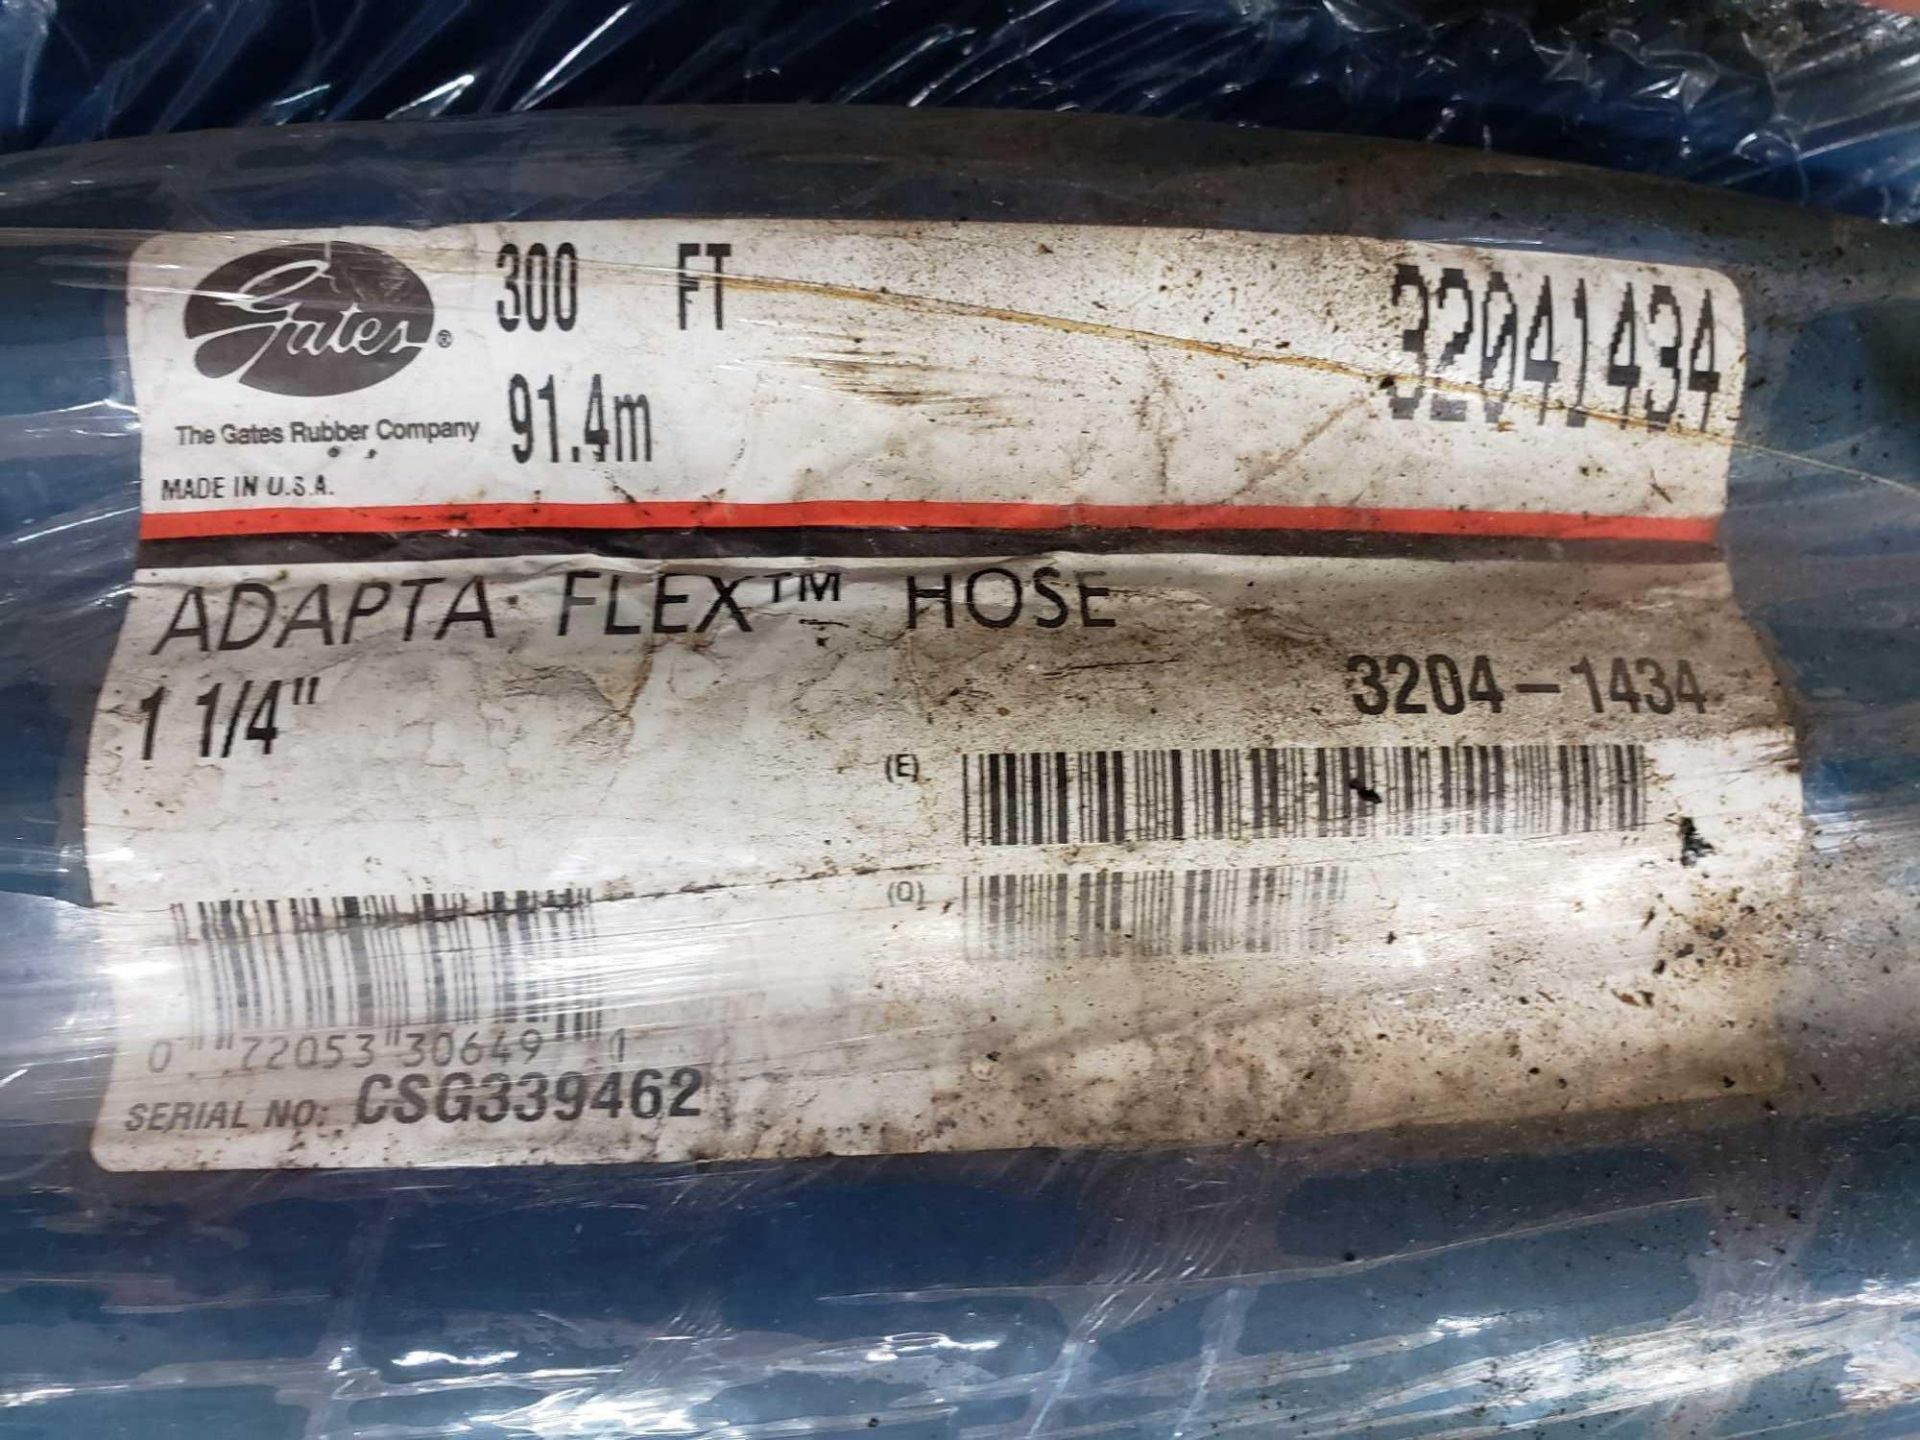 Gates 1 1/4" adapta-flex hose. Model 320411434. Marked as 300ft. New in roll. - Image 2 of 2